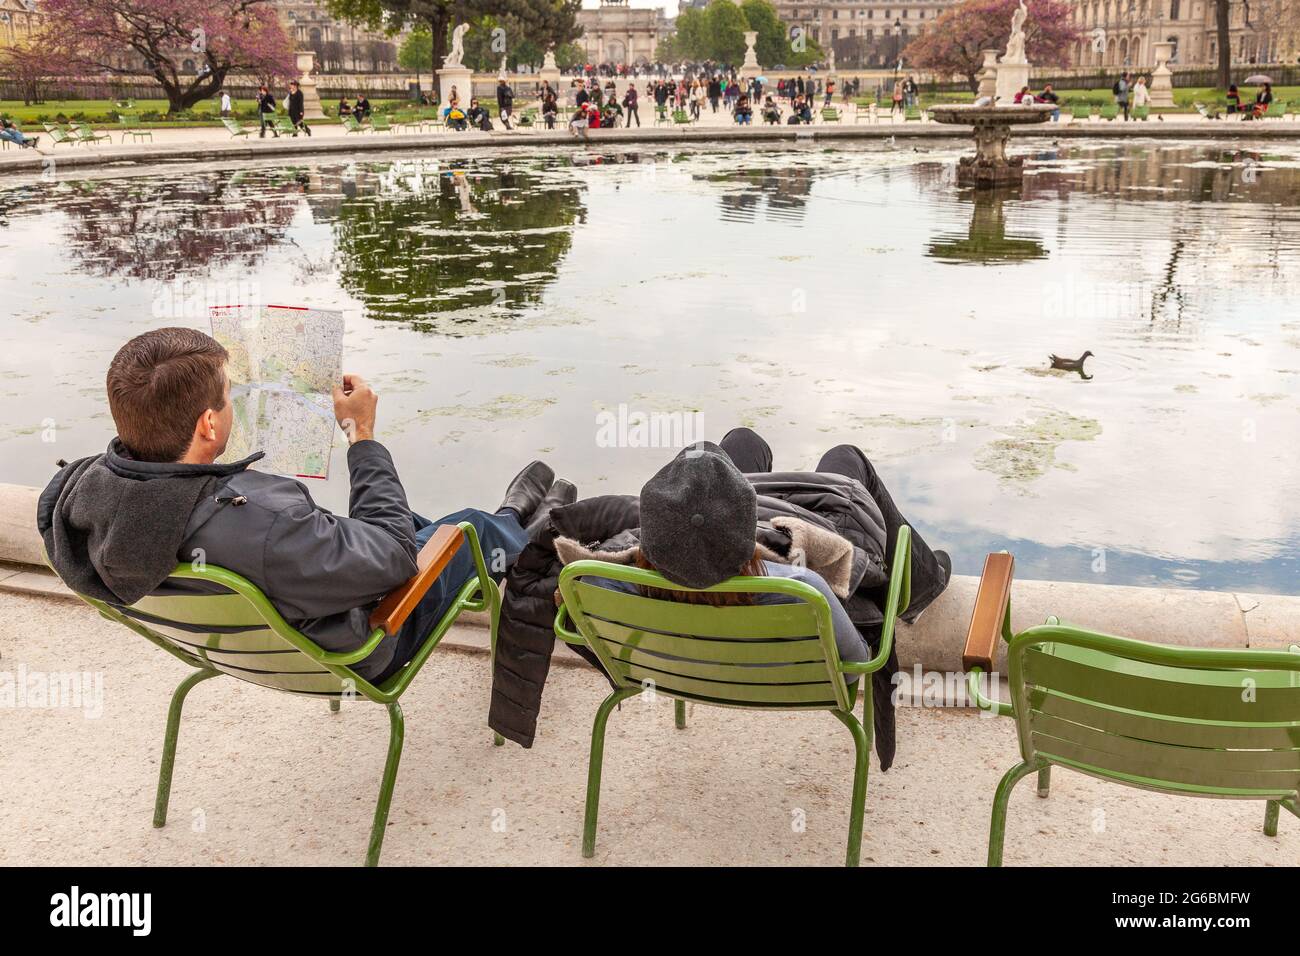 Two tourists, swinging in their chairs, sitting on the edge of a body of water in the Tuileries garden in Paris Stock Photo